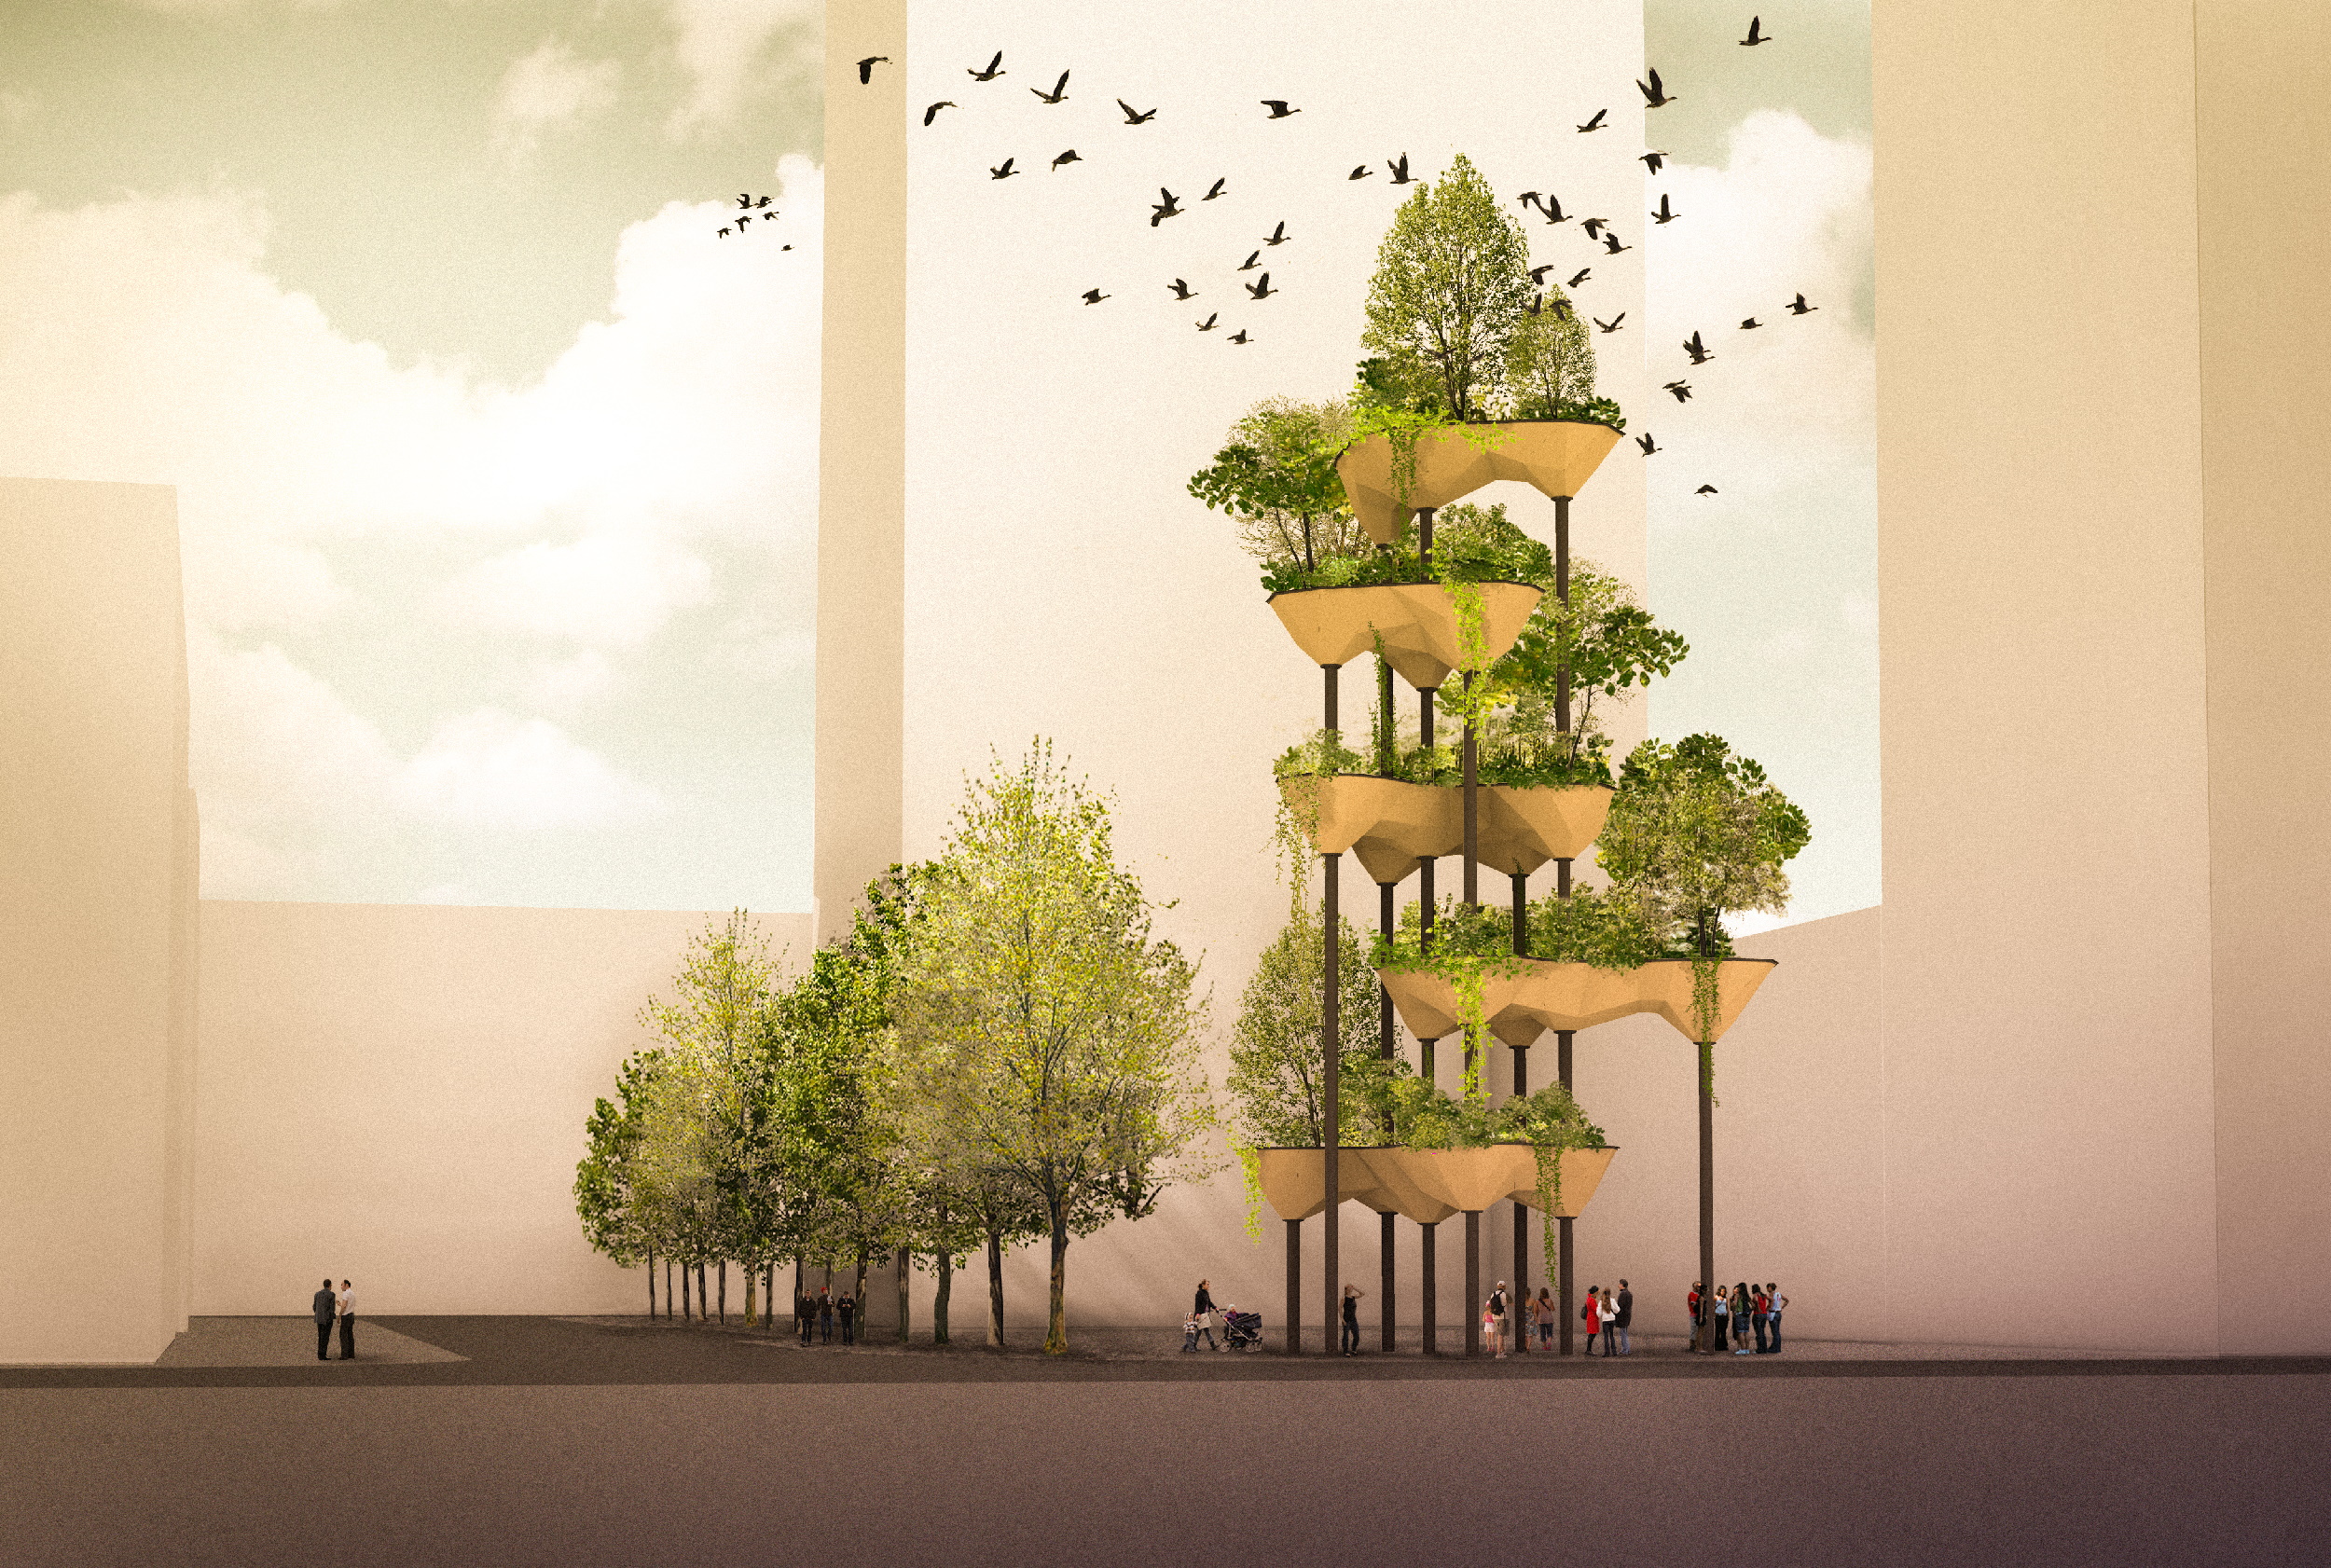 Computer rendering of what the final Semiramis hanging garden structure will look like.